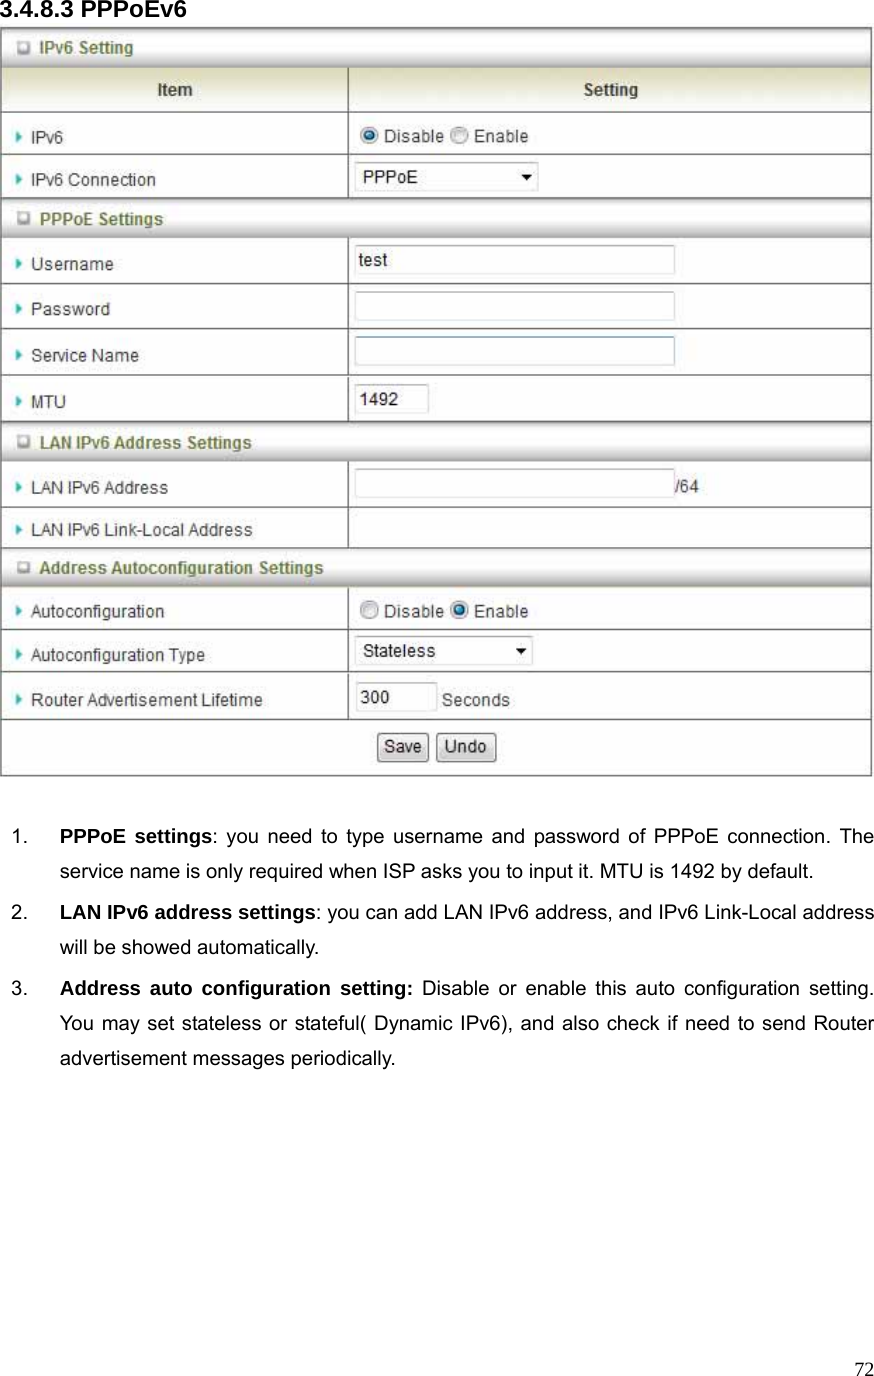  723.4.8.3 PPPoEv6   1.  PPPoE settings: you need to type username and password of PPPoE connection. The service name is only required when ISP asks you to input it. MTU is 1492 by default.   2.  LAN IPv6 address settings: you can add LAN IPv6 address, and IPv6 Link-Local address will be showed automatically. 3.  Address auto configuration setting: Disable or enable this auto configuration setting. You may set stateless or stateful( Dynamic IPv6), and also check if need to send Router advertisement messages periodically.       